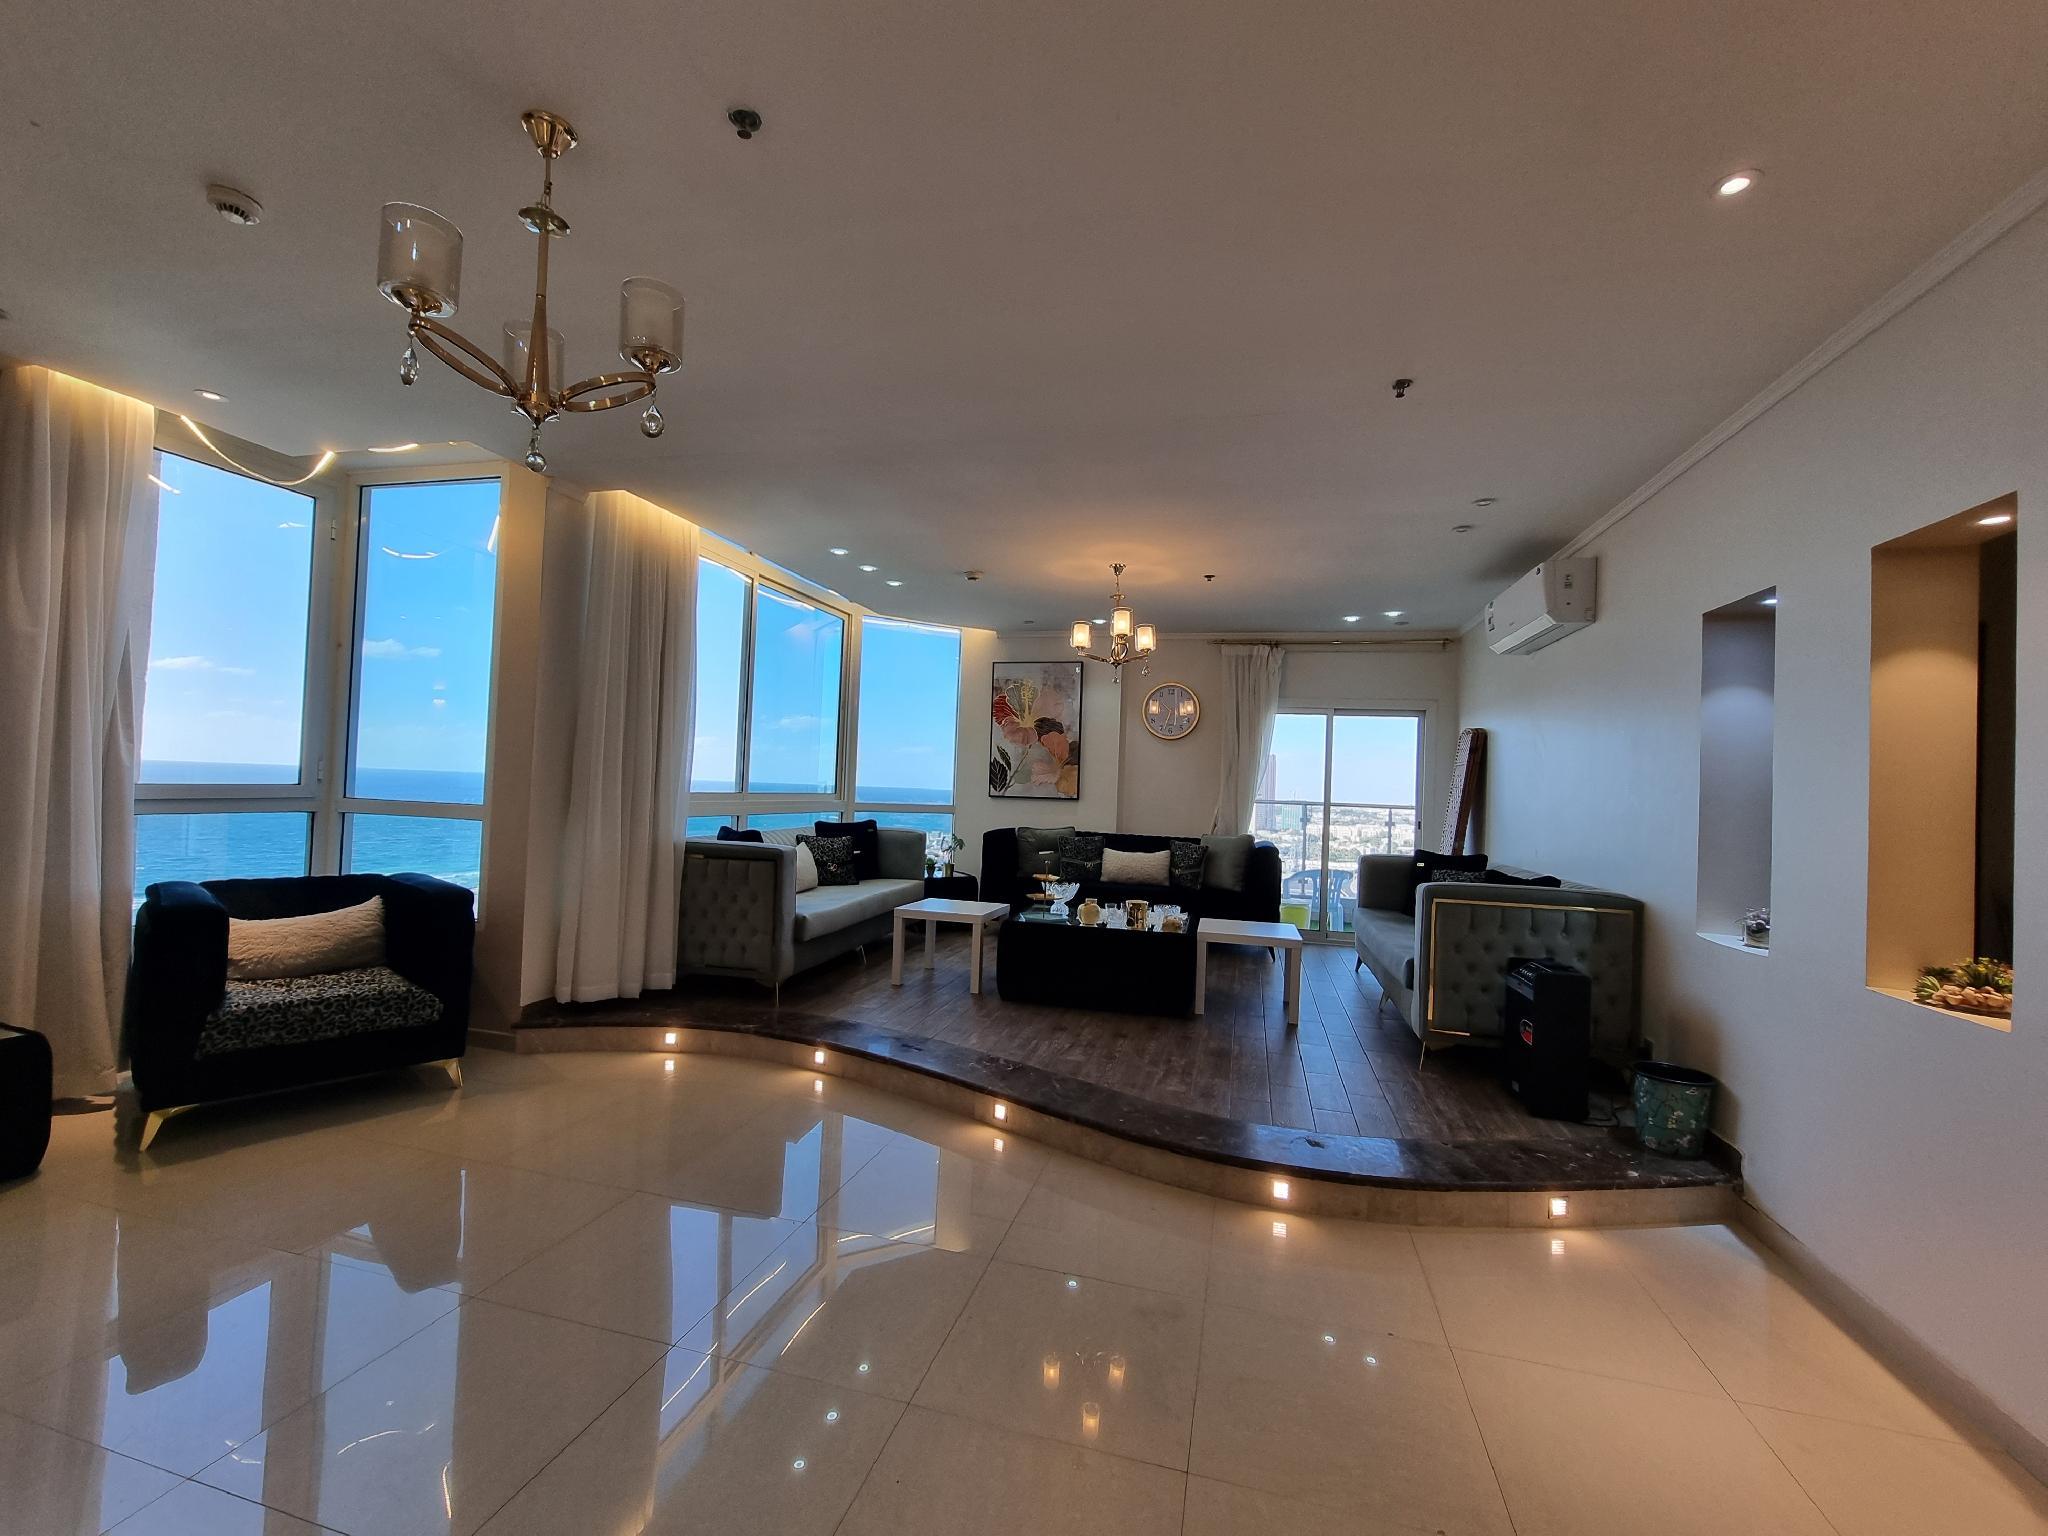 Apartment Overlooking The Sea And The Formulatower - جدة